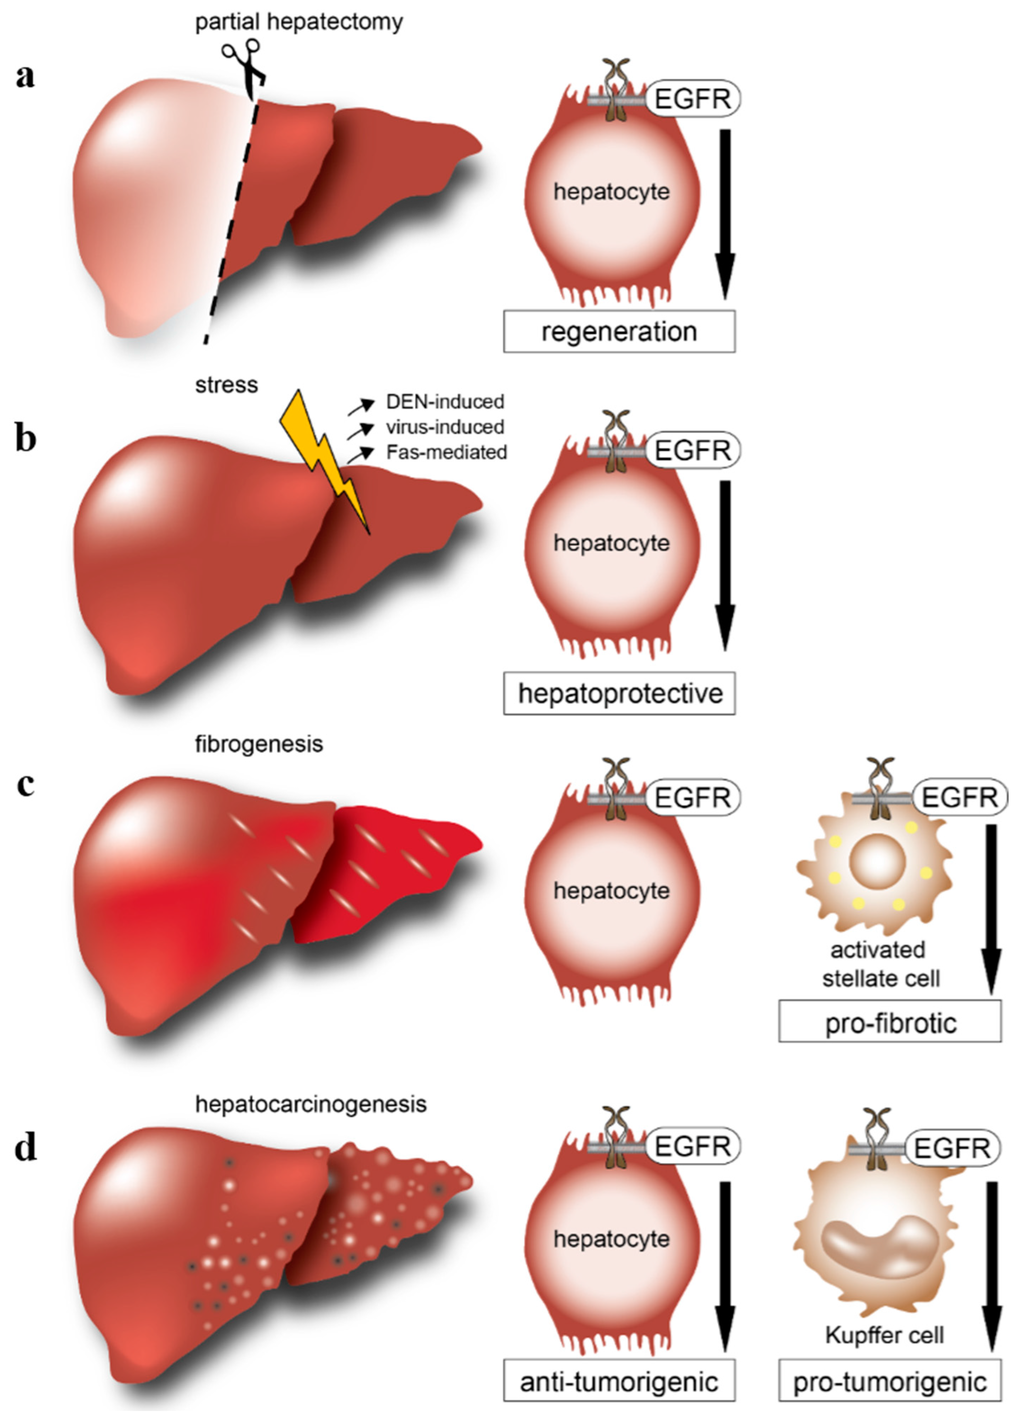 IJMS | Free Full-Text | EGFR Signaling in Liver Diseases